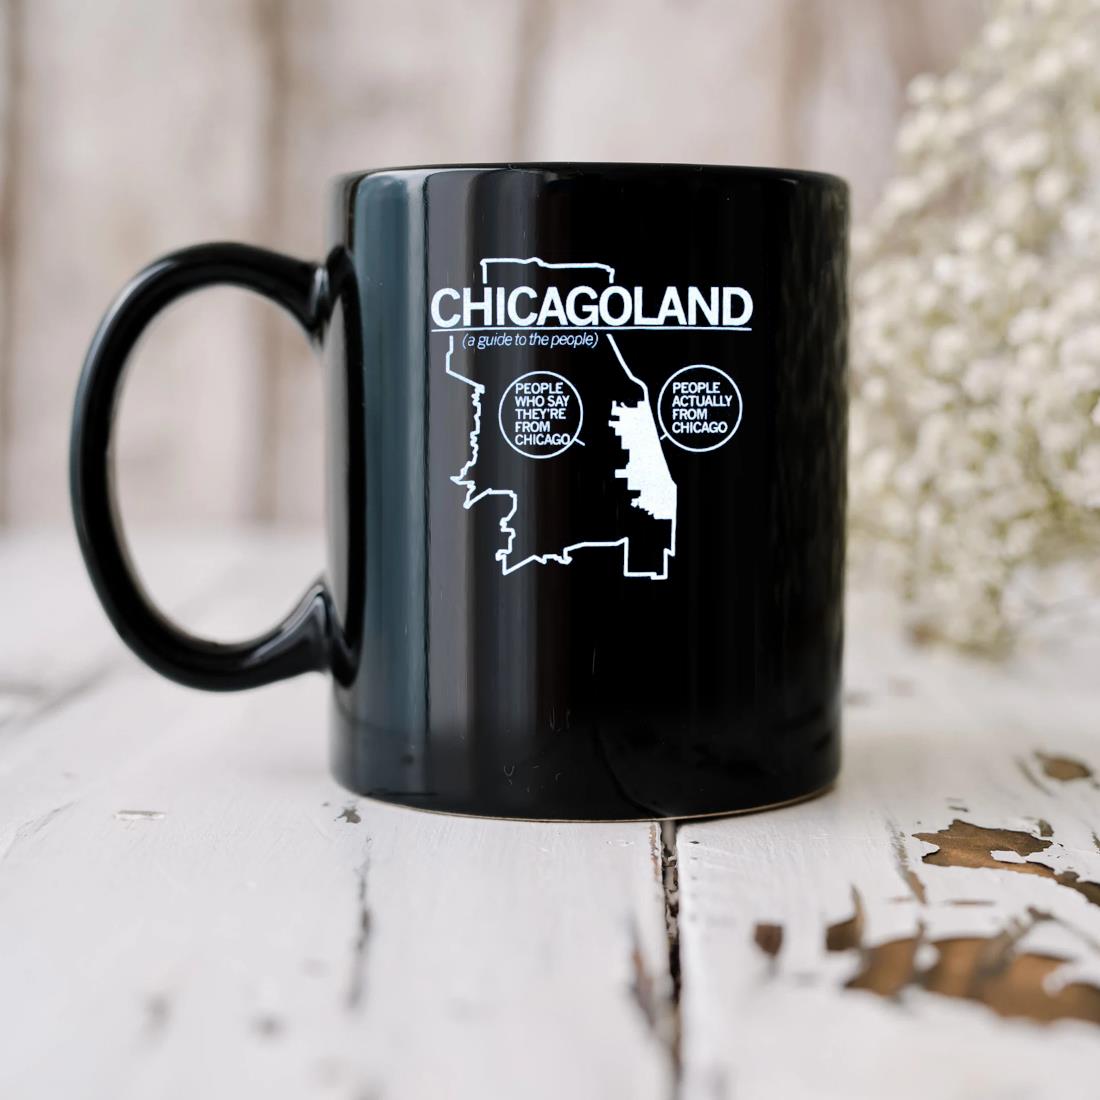 Chicagoland people who say they're from chicago people actually from chicago Mug